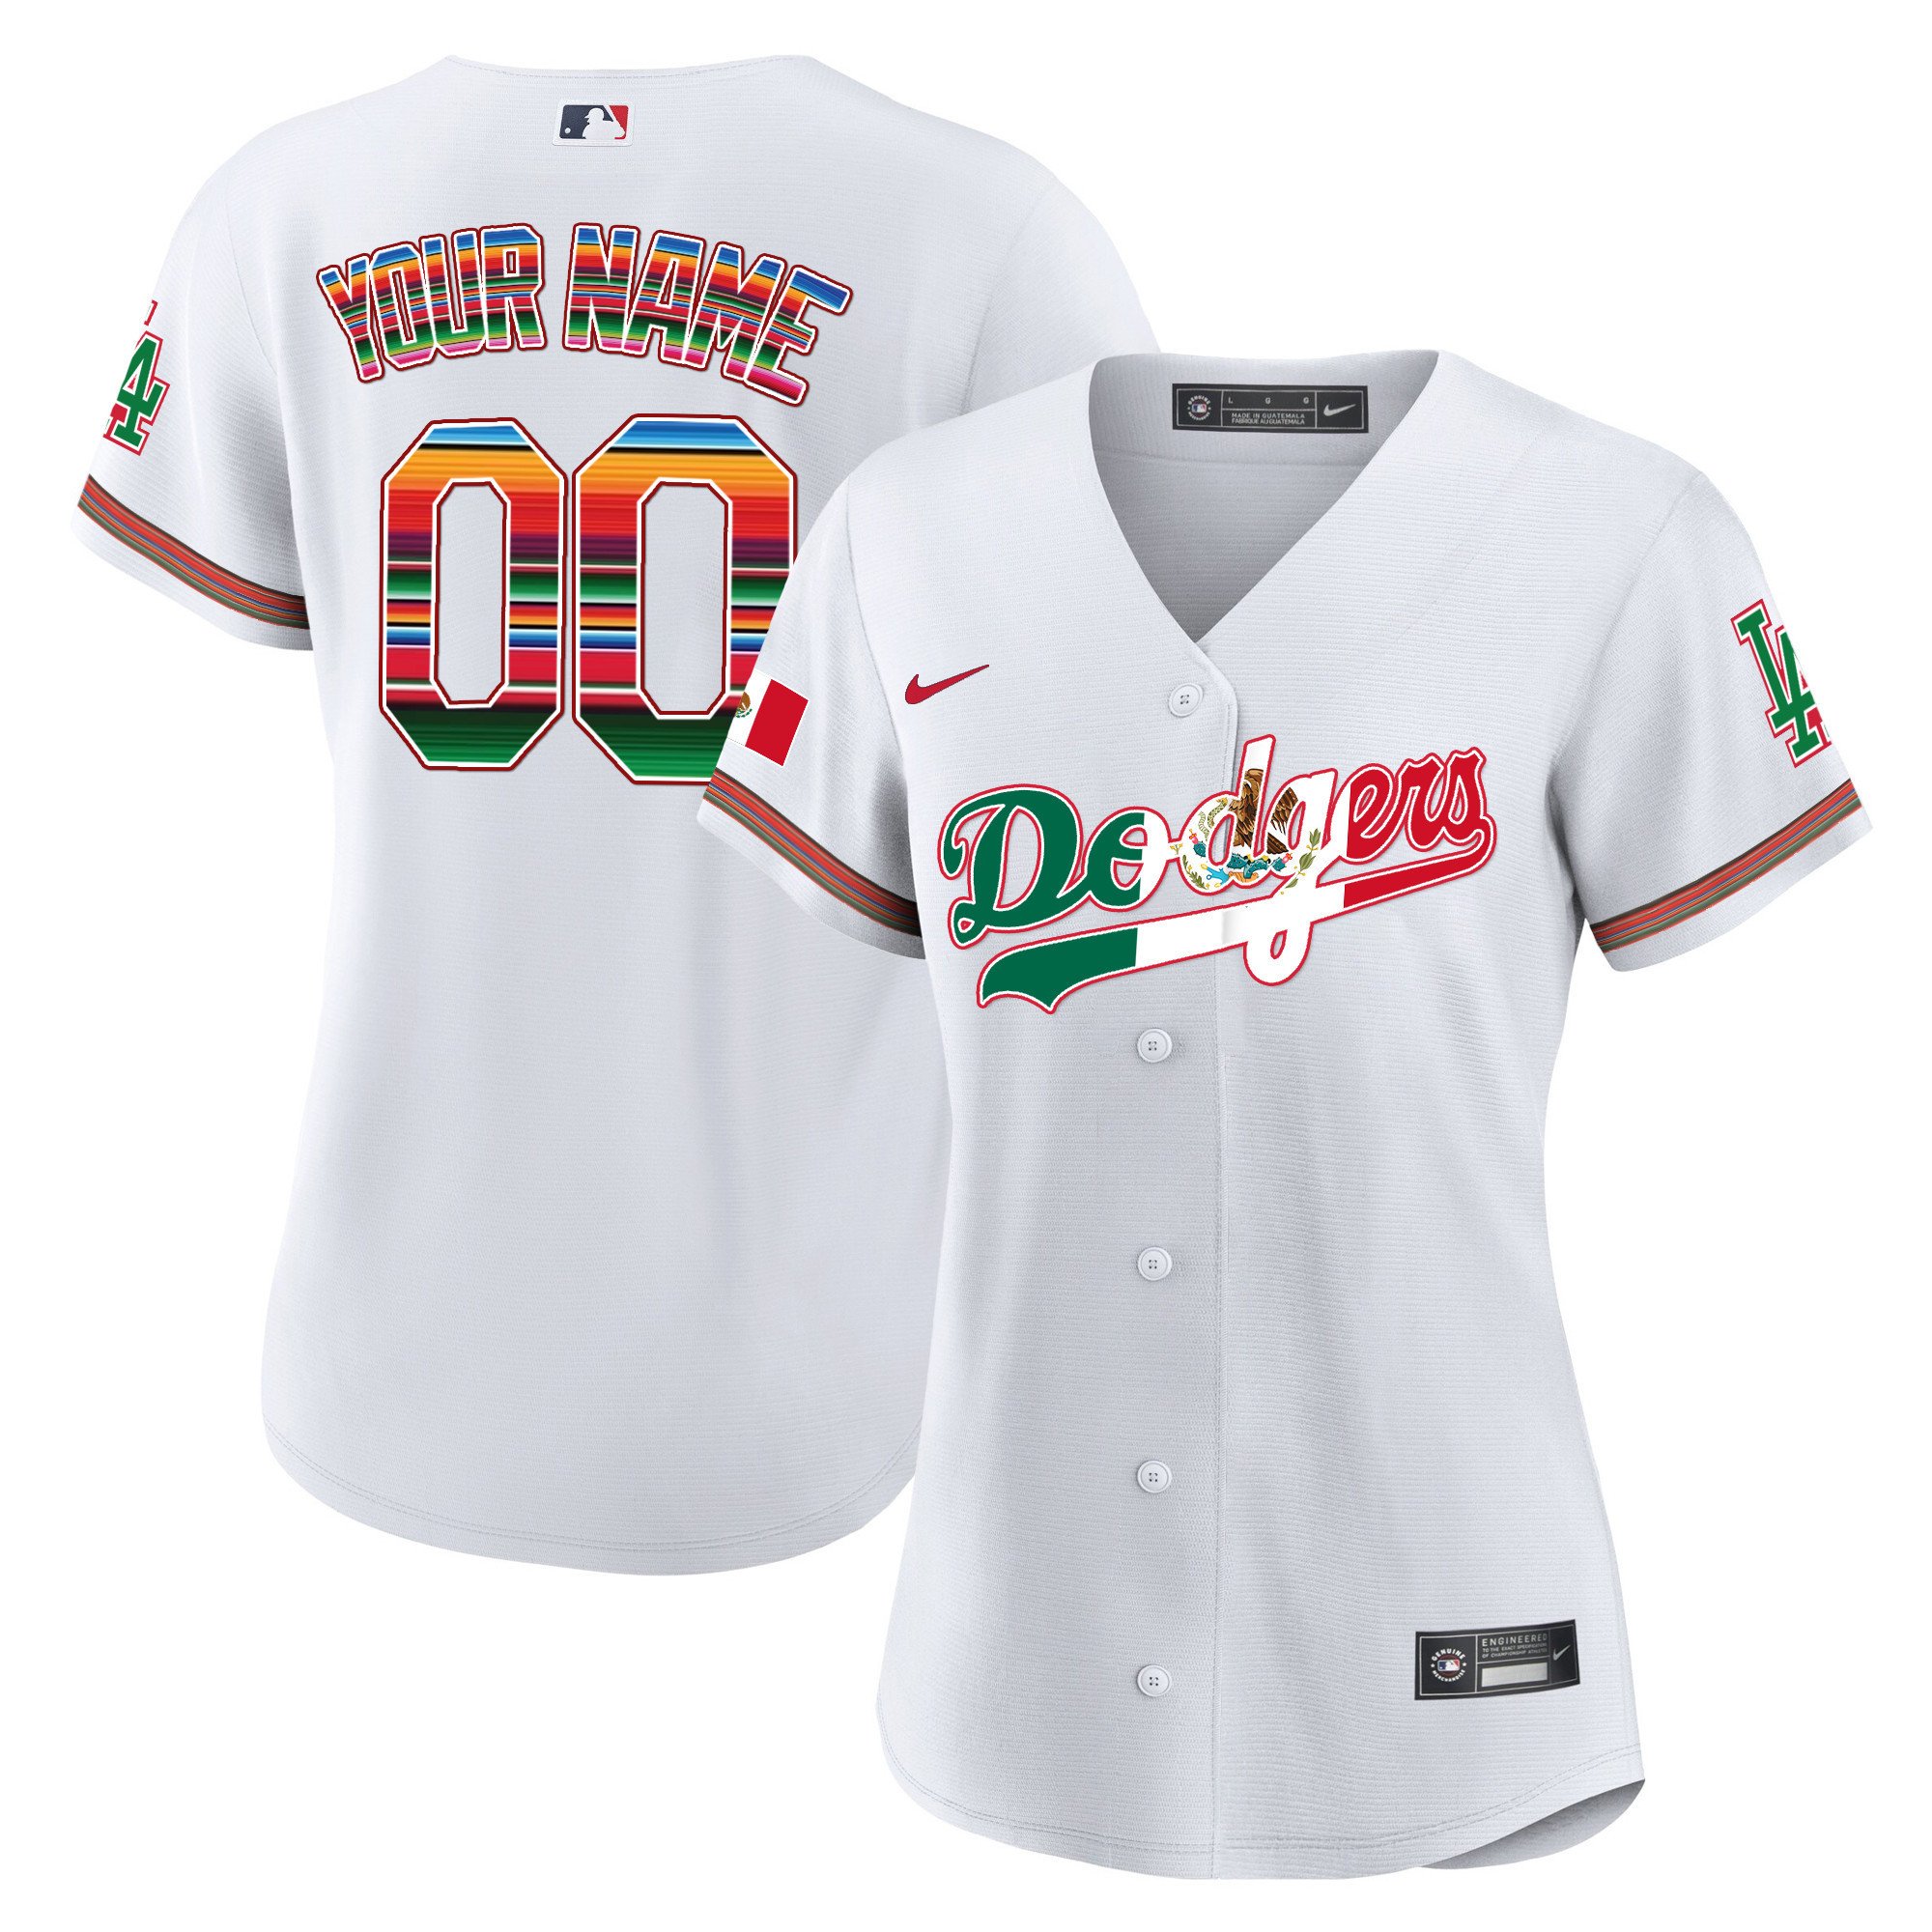 Dodgers Mexico Cool Base Limited Custom Jersey V4 - All Stitched - Vgear